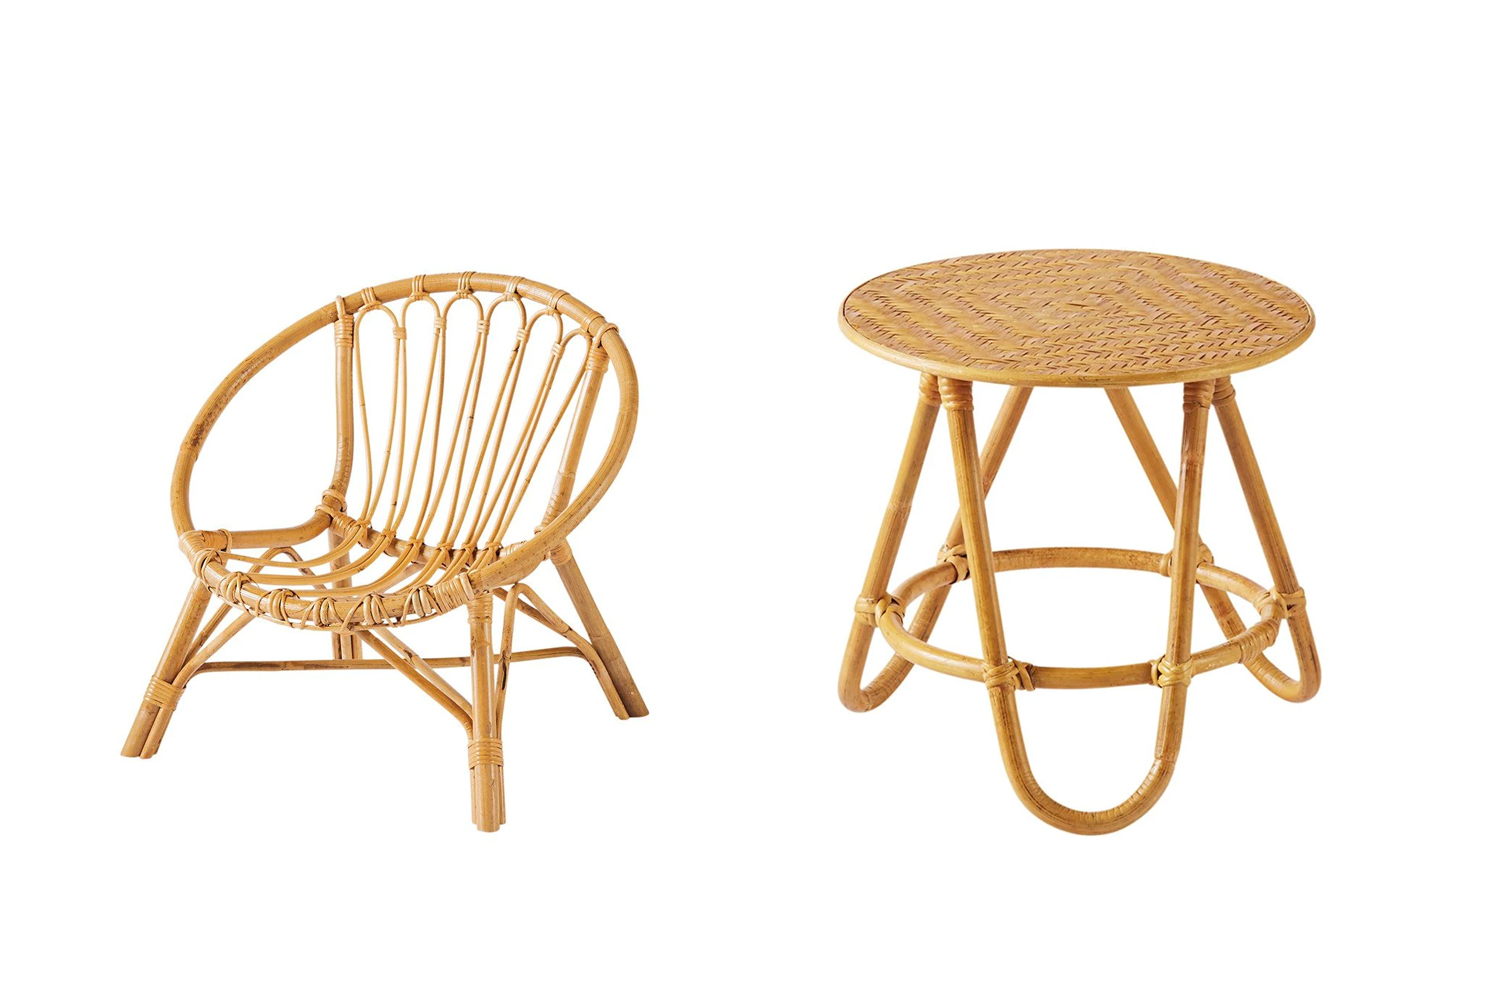 the bonton boheme table and chair kids set starts with the chairs at €85 12